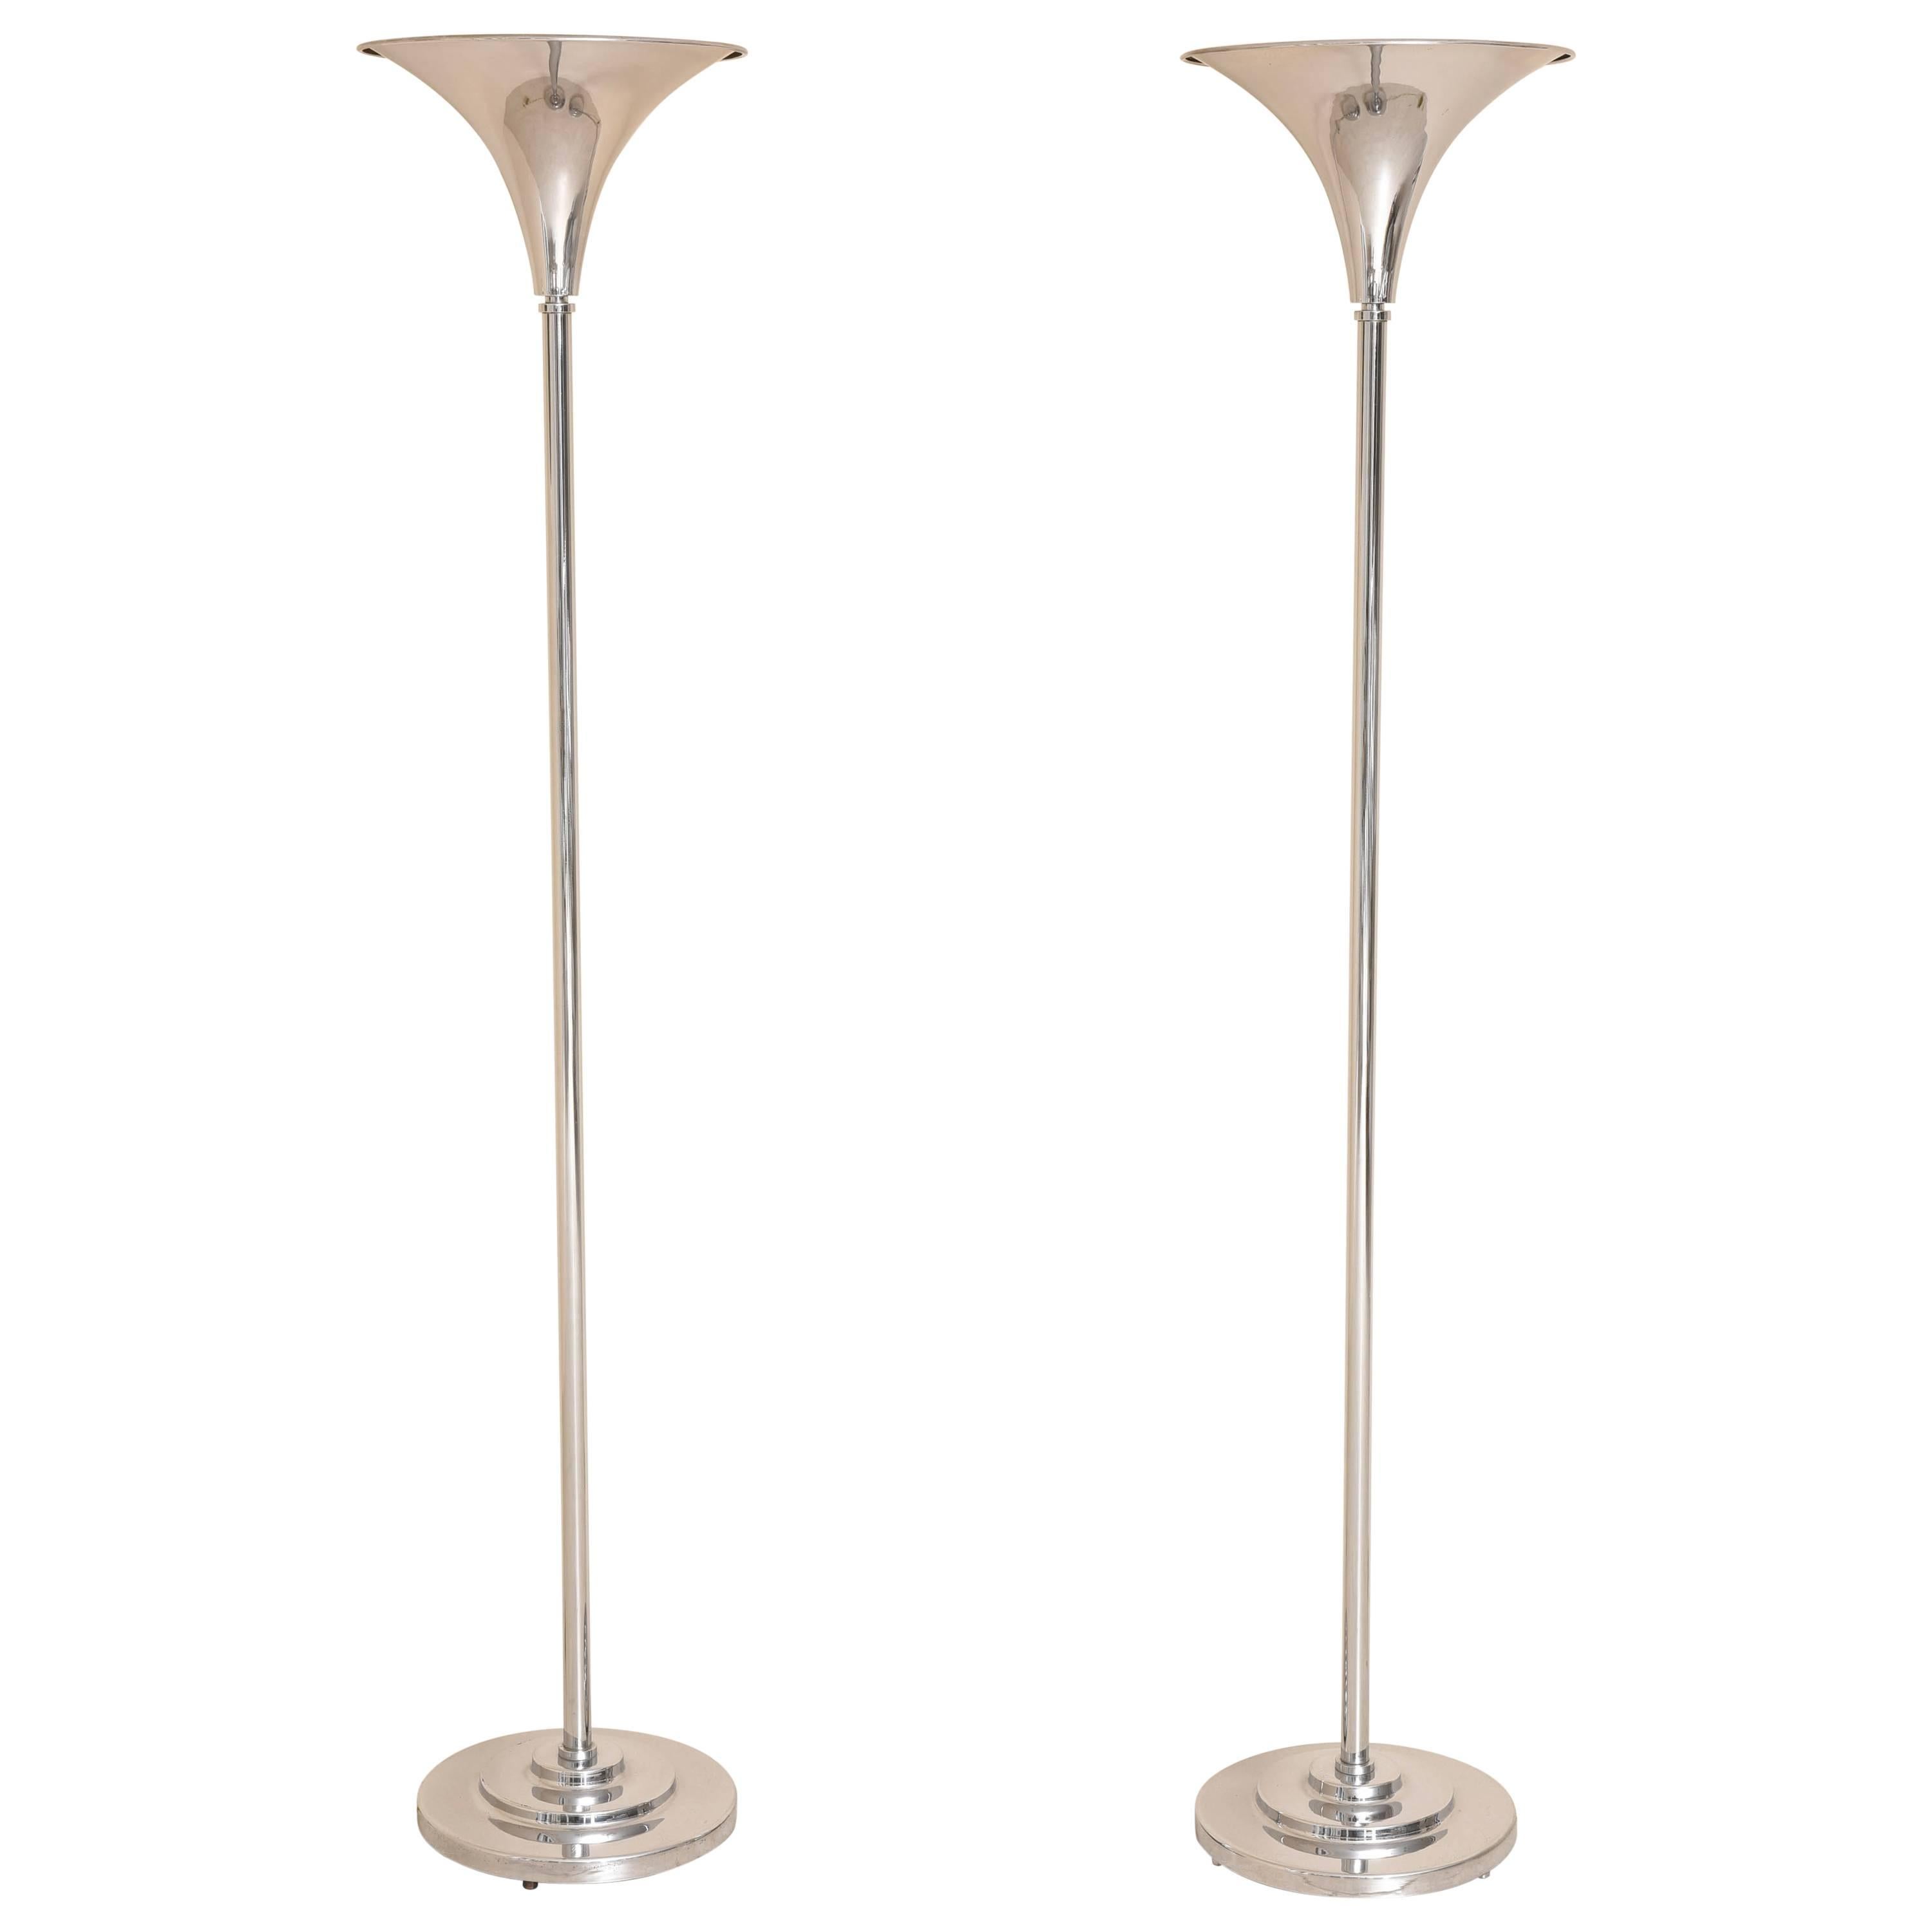 Pair of American Art Deco Style Nickel-Plated Torcheres, Marbro Lamp Company